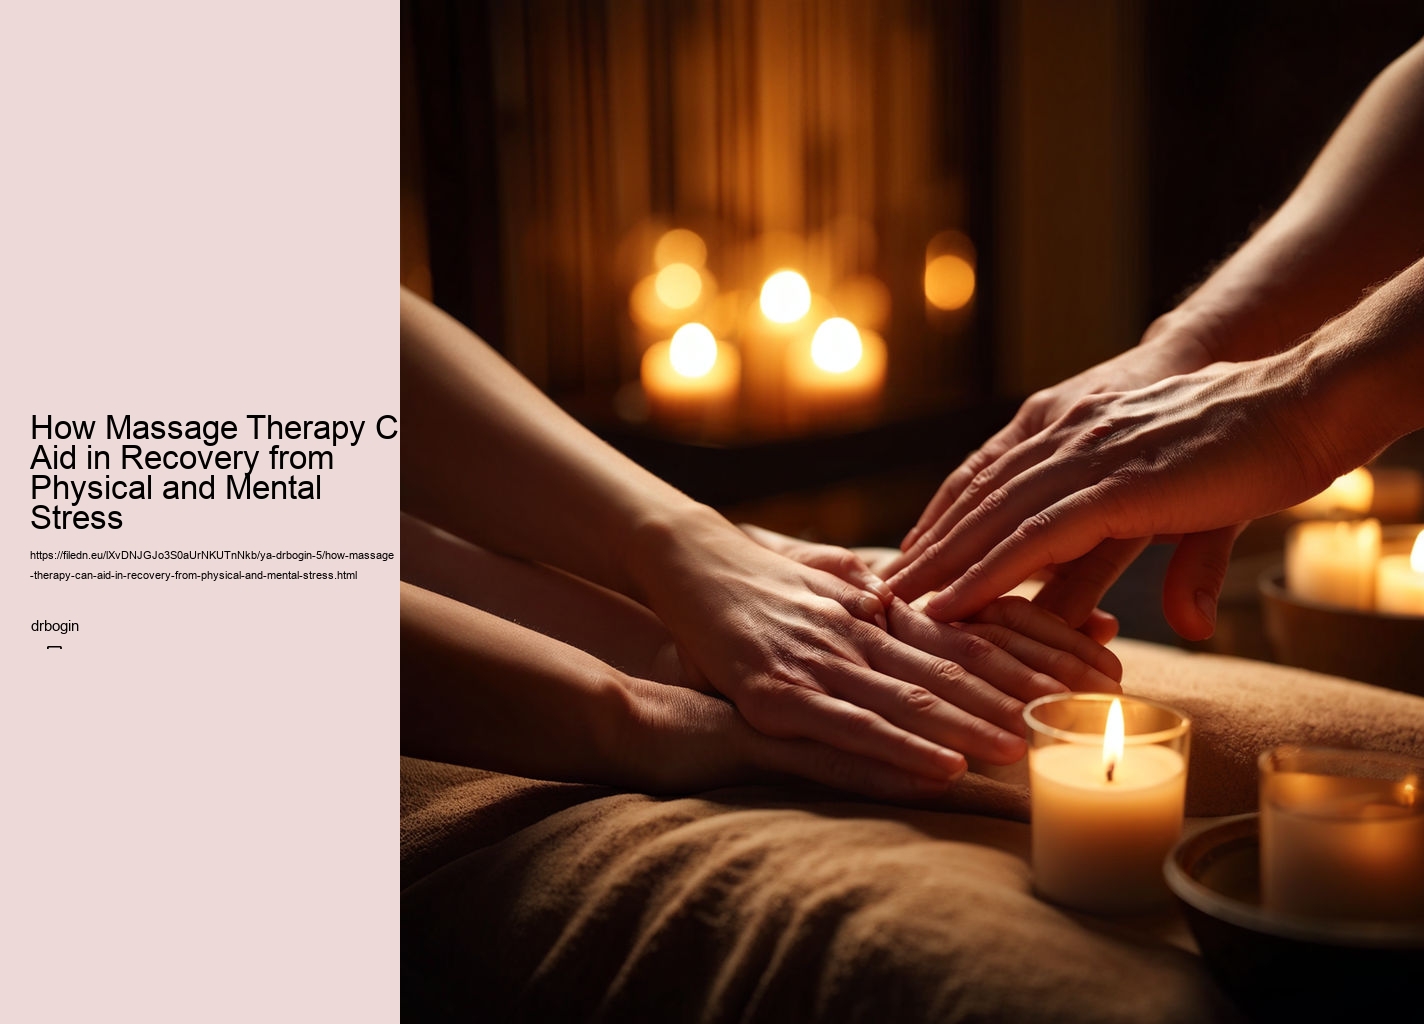 How Massage Therapy Can Aid in Recovery from Physical and Mental Stress